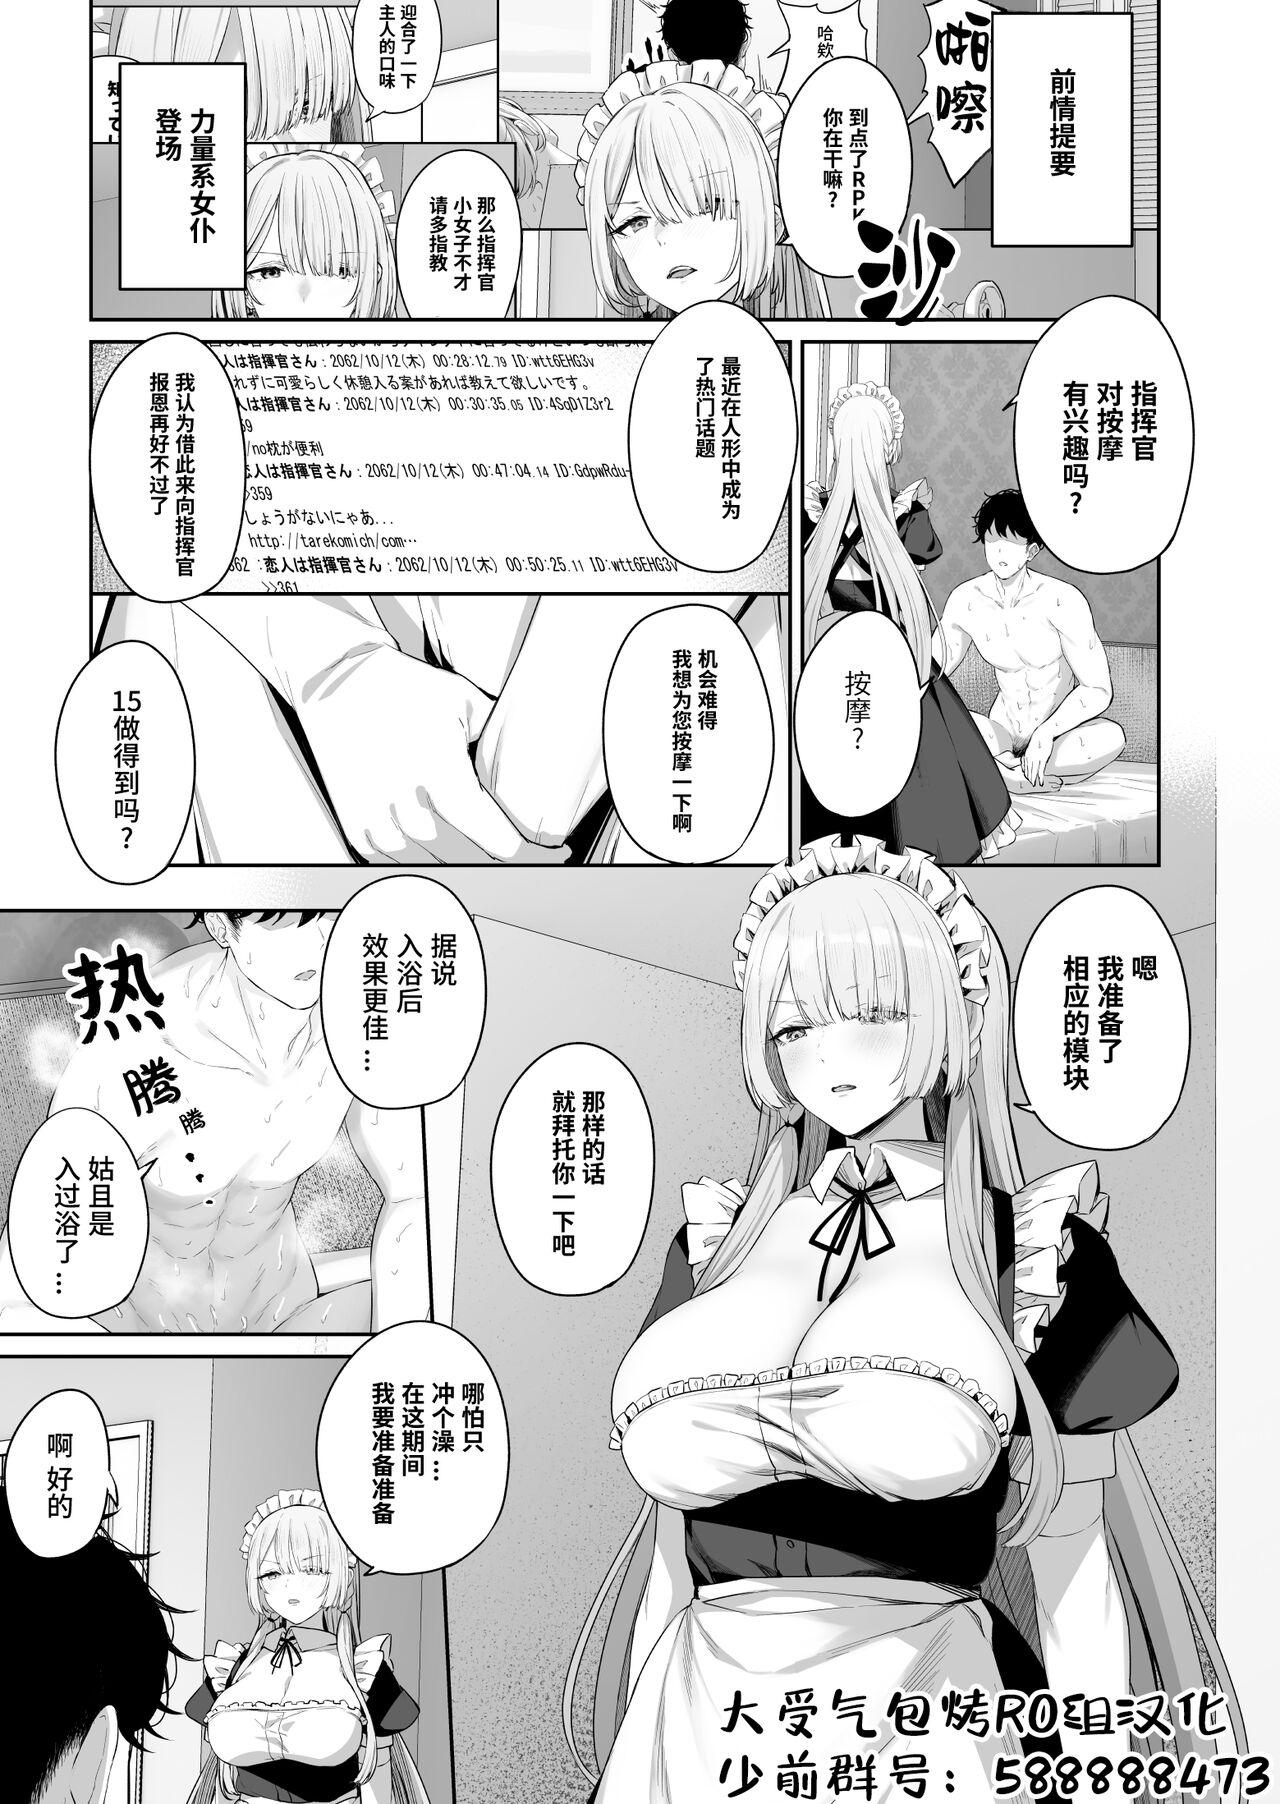 Price AK15の進捗1 - Girls frontline Massages - Page 1